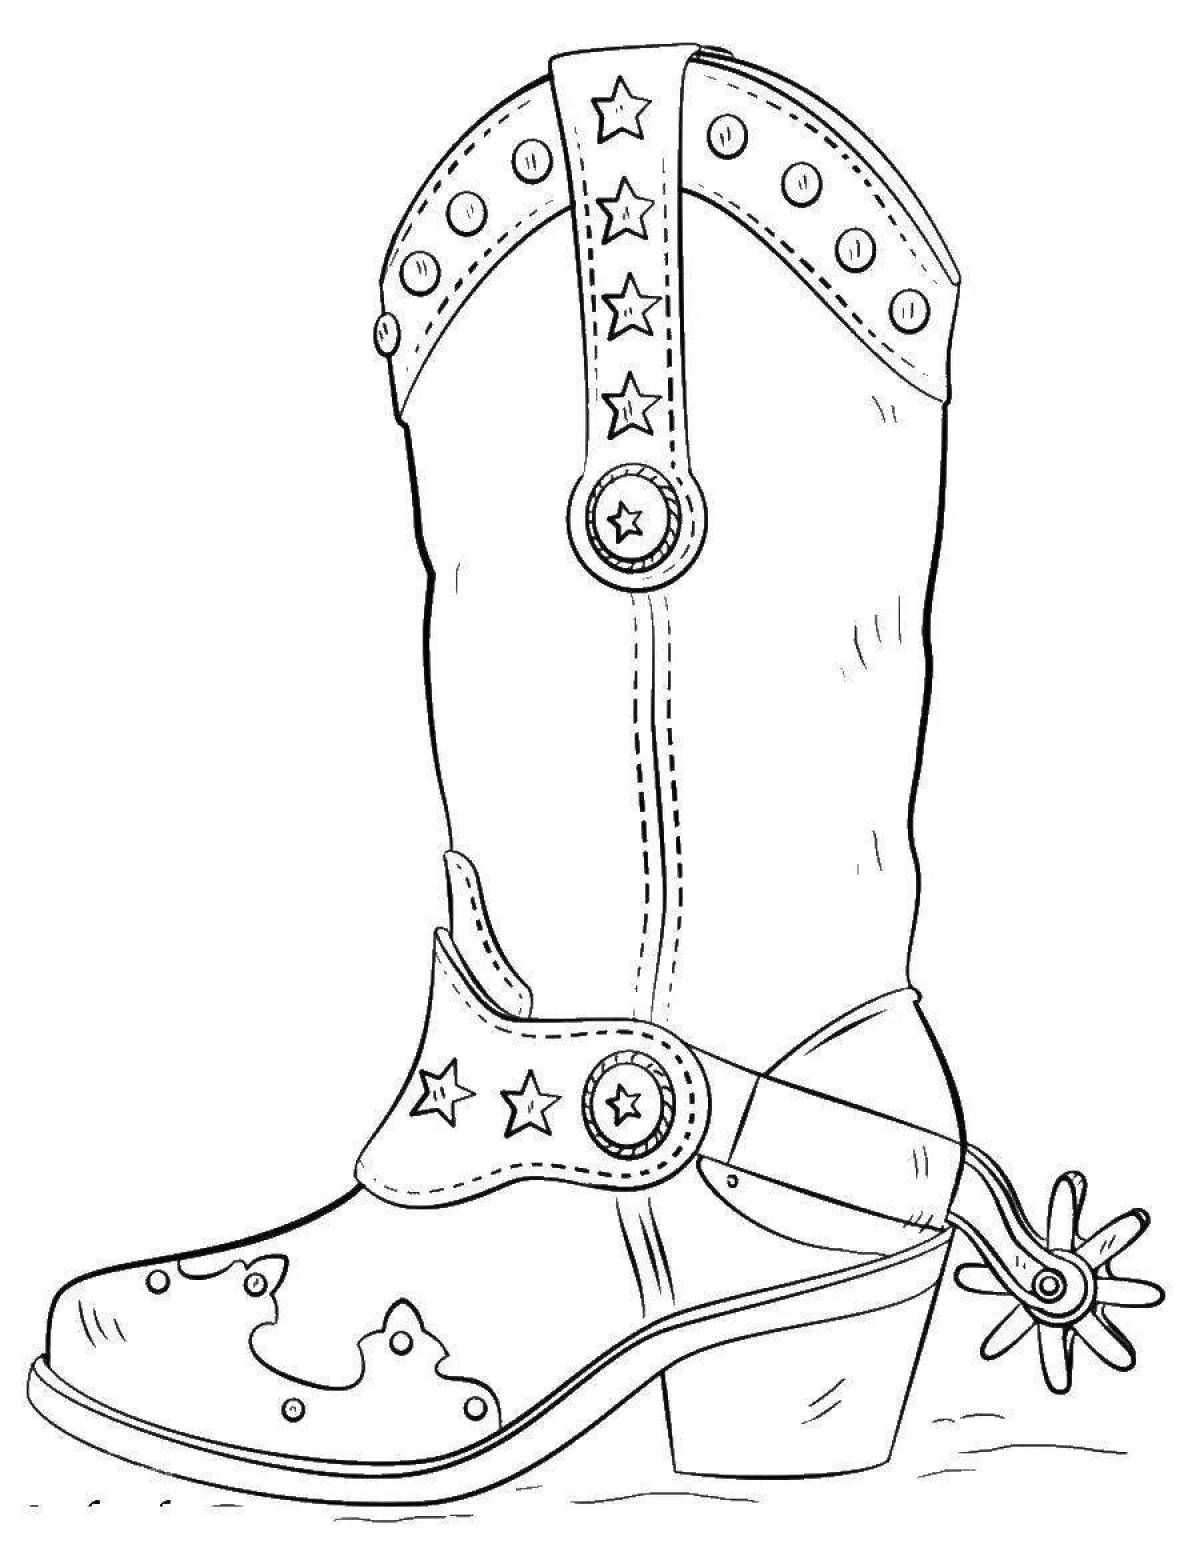 Glorious Tatar boot coloring page